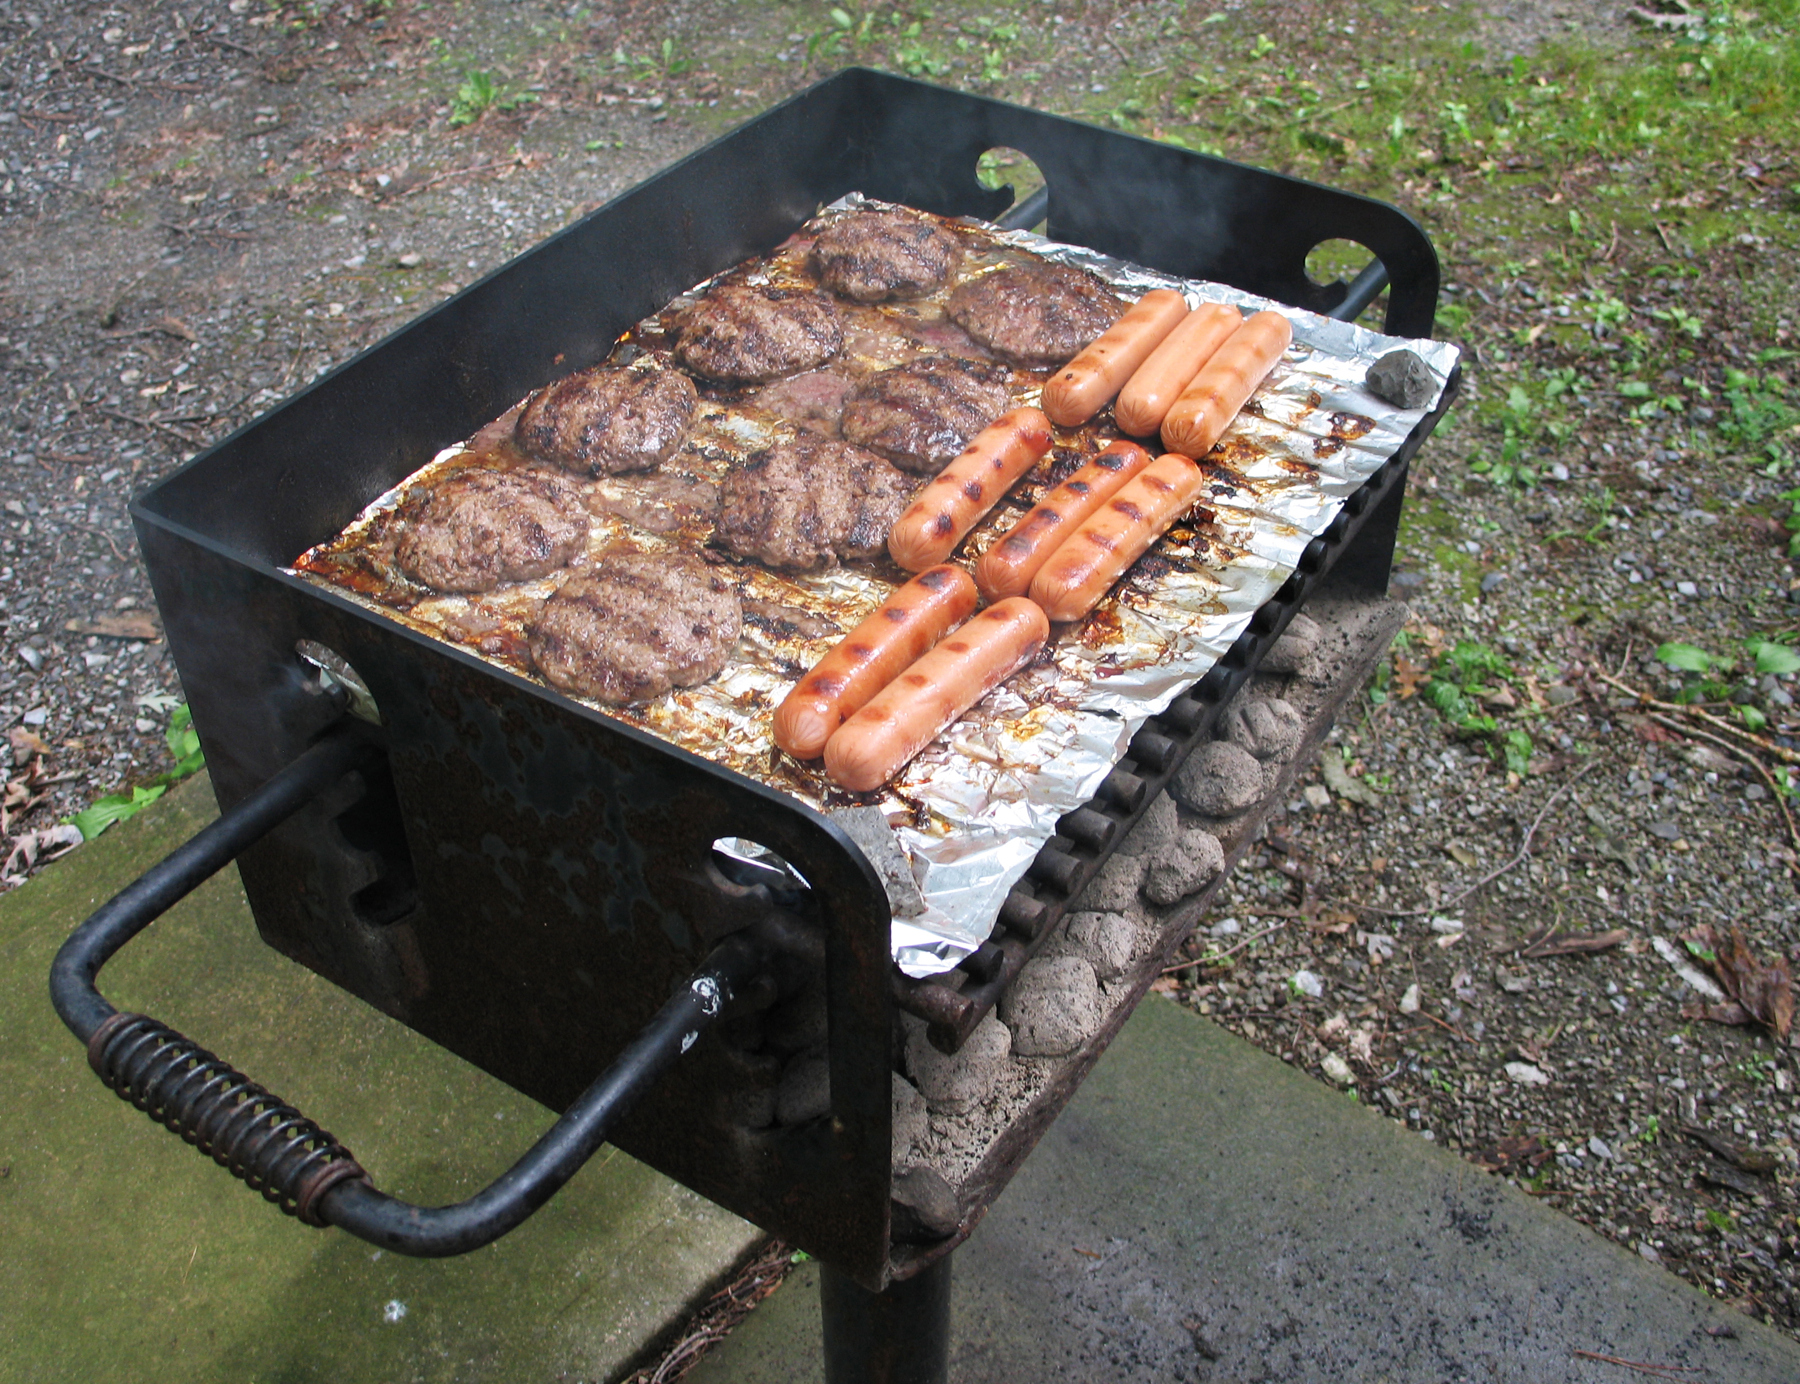 How to Cook Hamburgers With Aluminum Foil on a Gas Grill